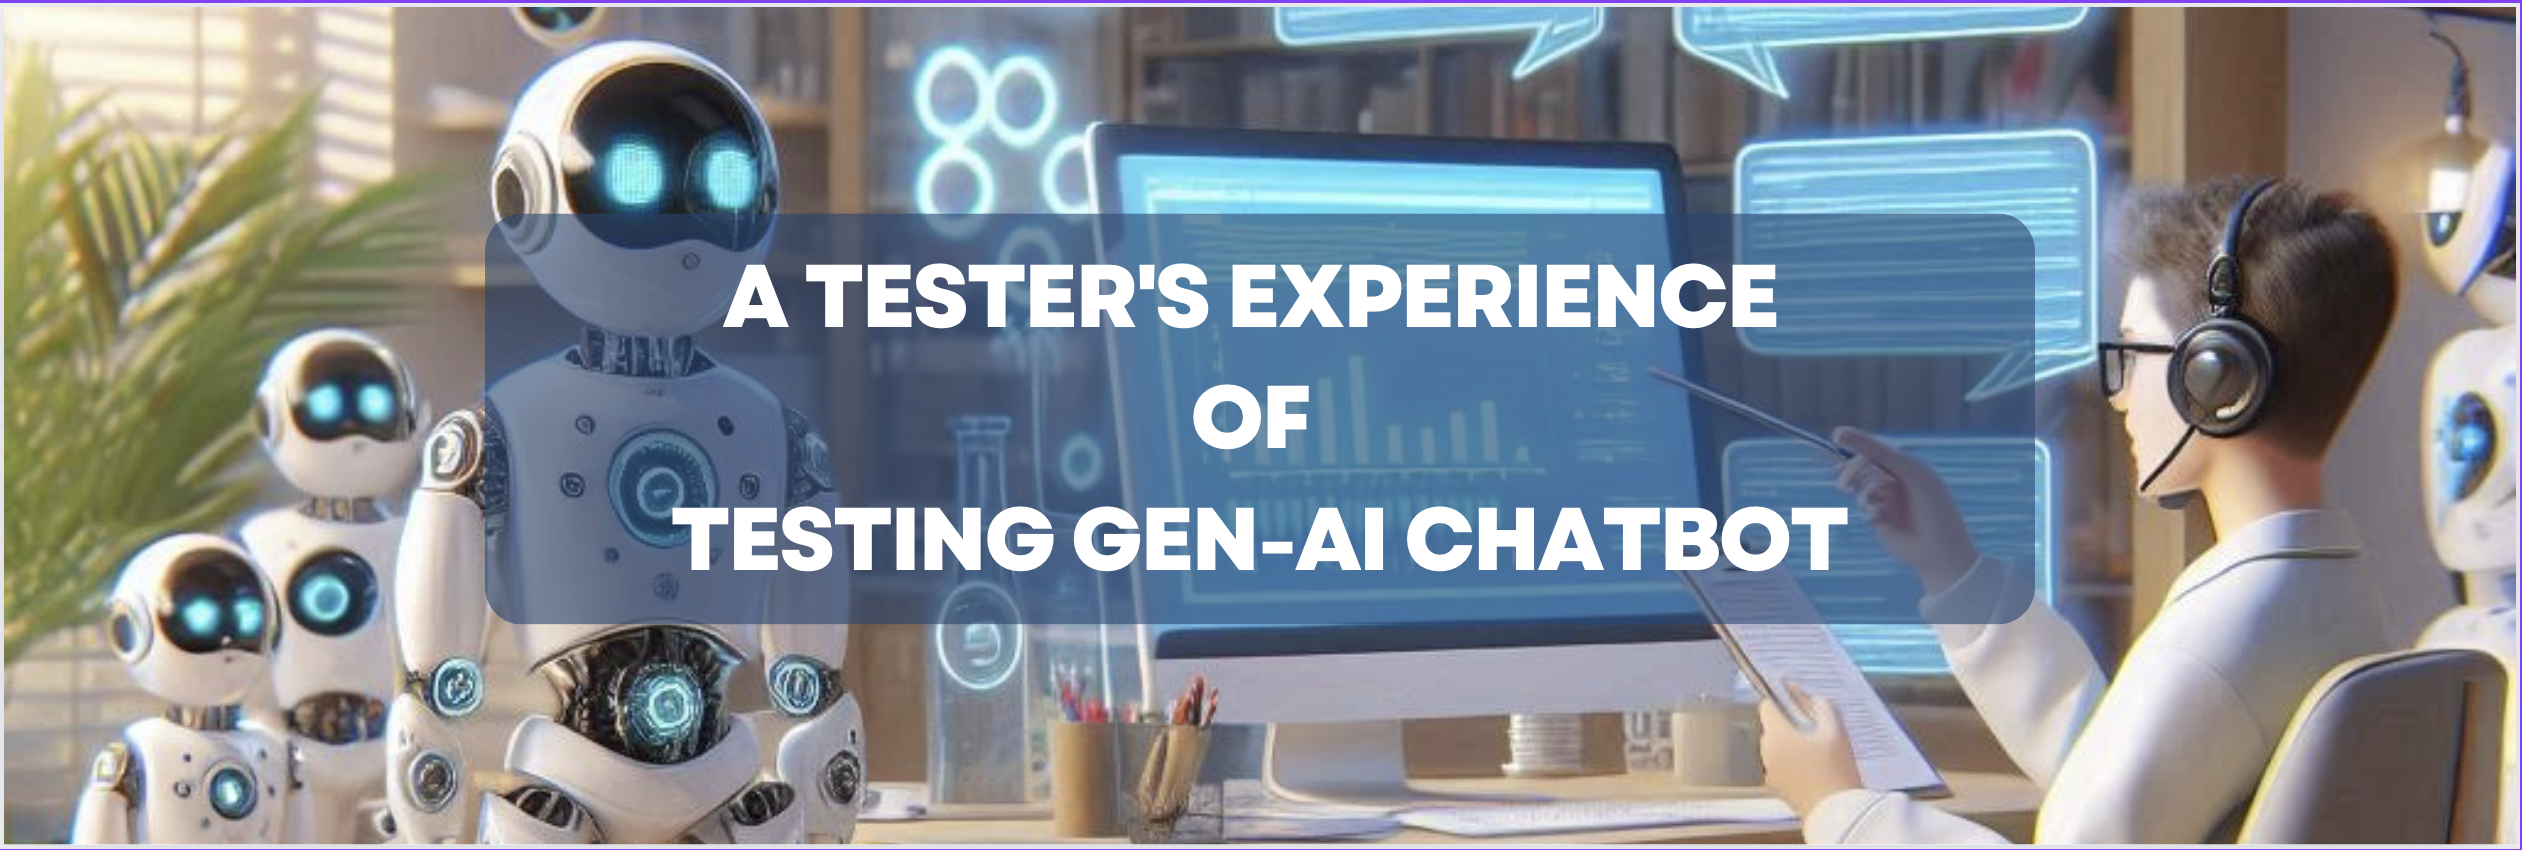 image for A Tester's Experience of Testing Gen-AI Chatbot